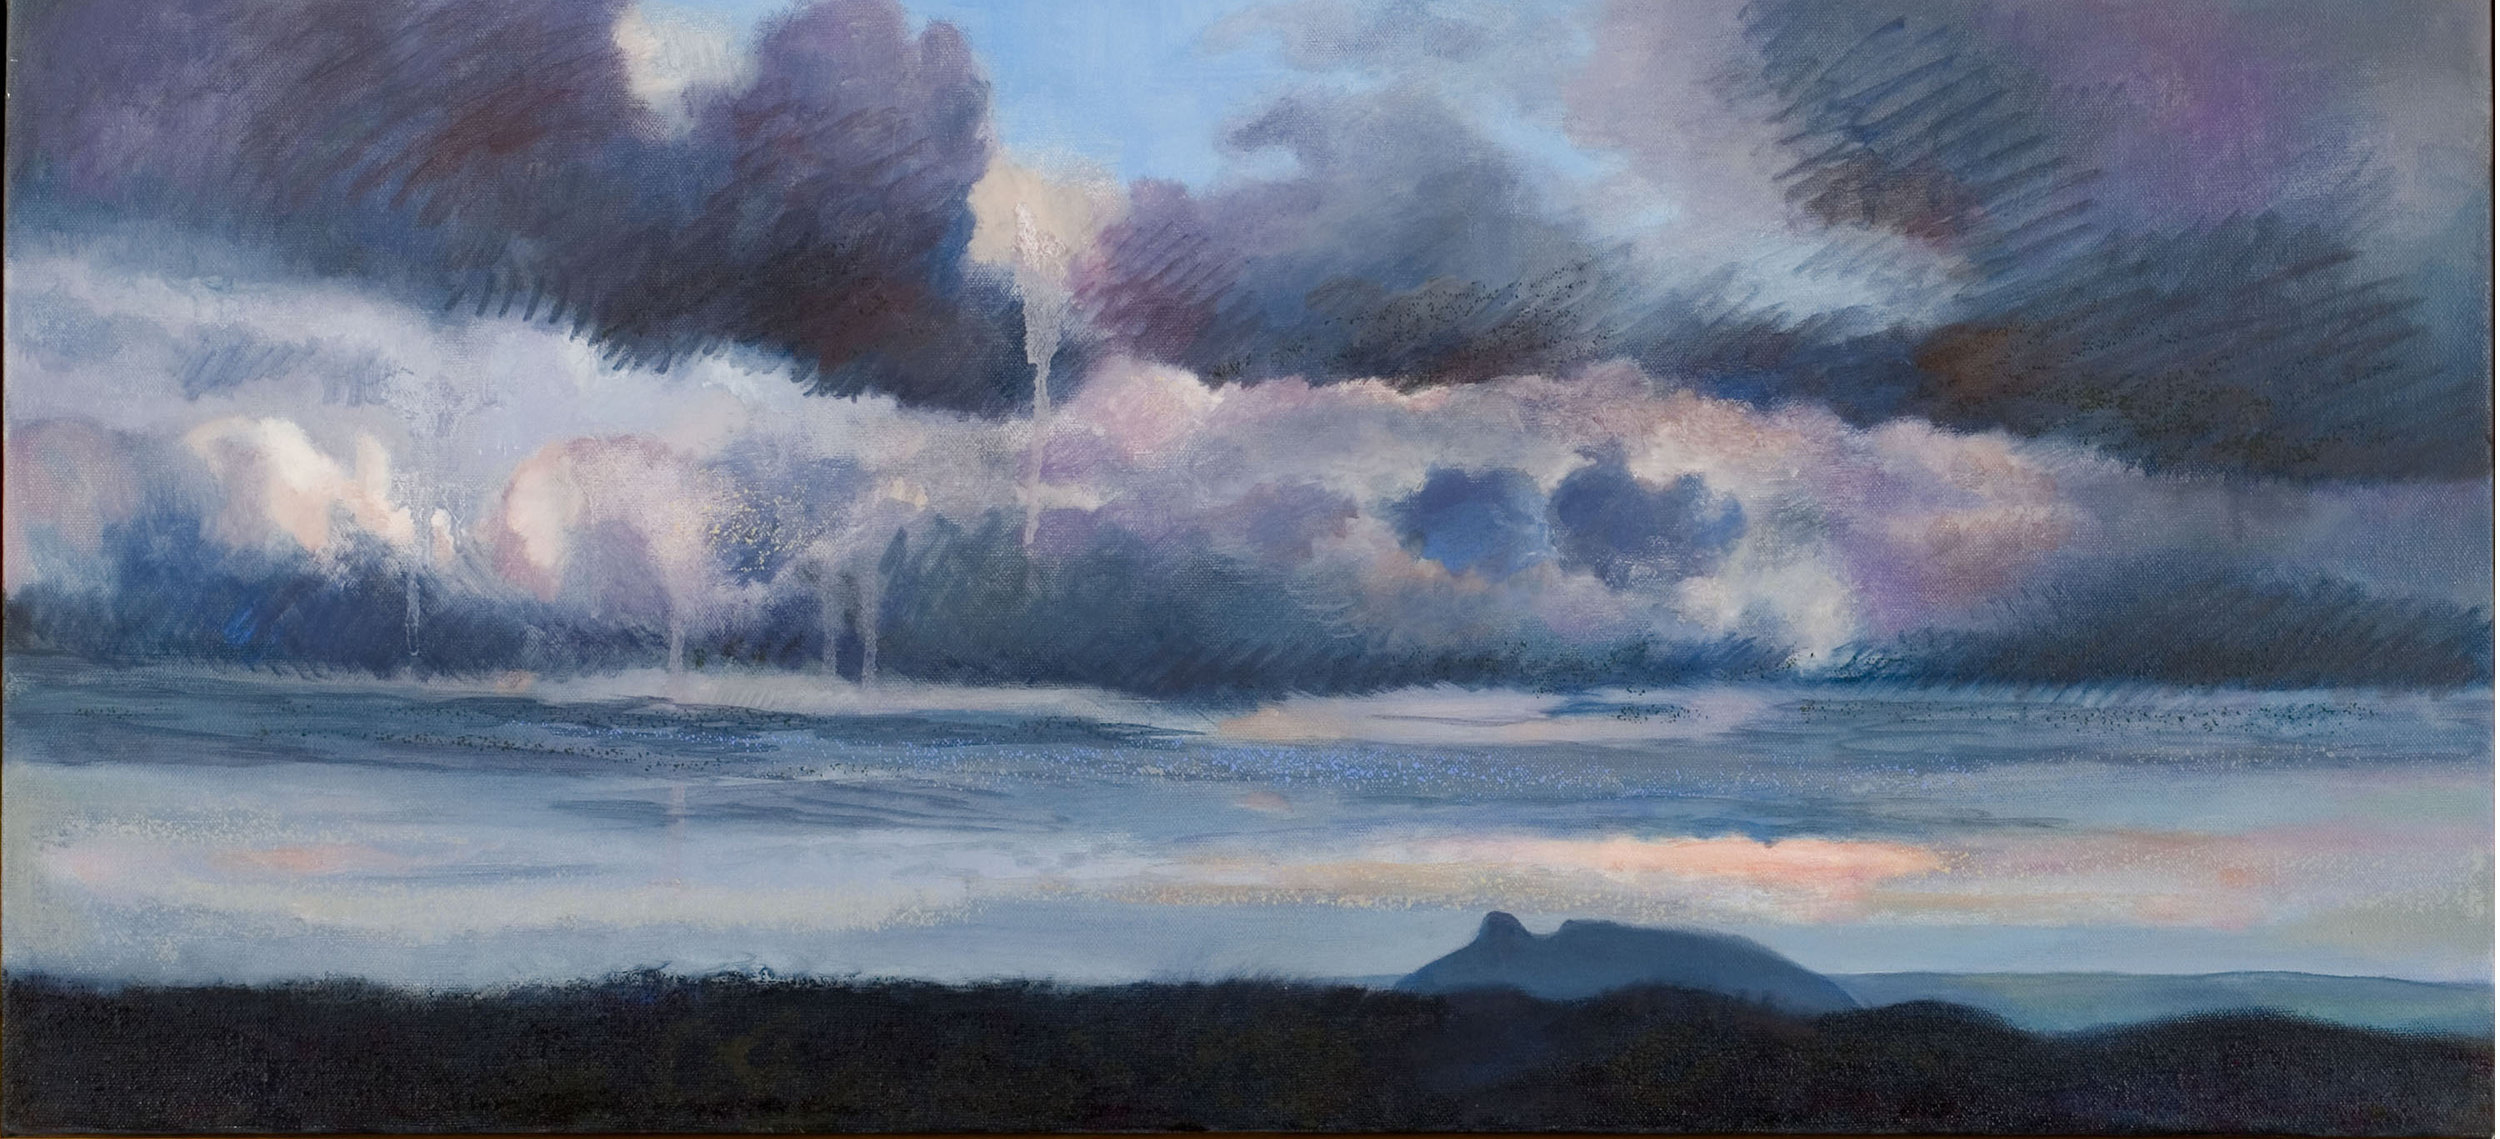 Pilot Mountain, oil and oil stick on canvas, 14 ¼ x 31 inches, 2005